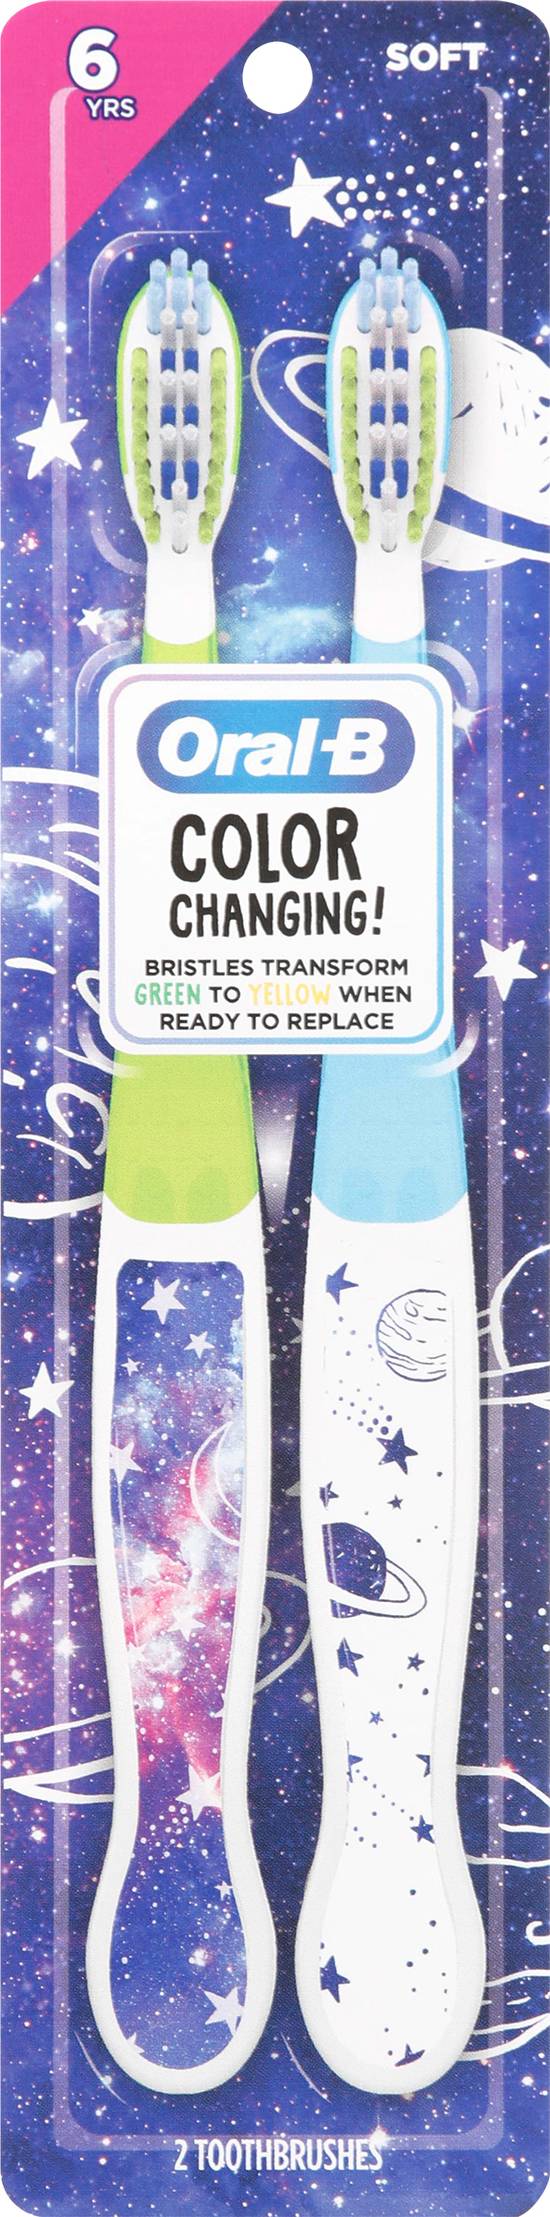 Oral-B Color Changing Galaxy Designs Kids Soft Toothbrush (2 ct)